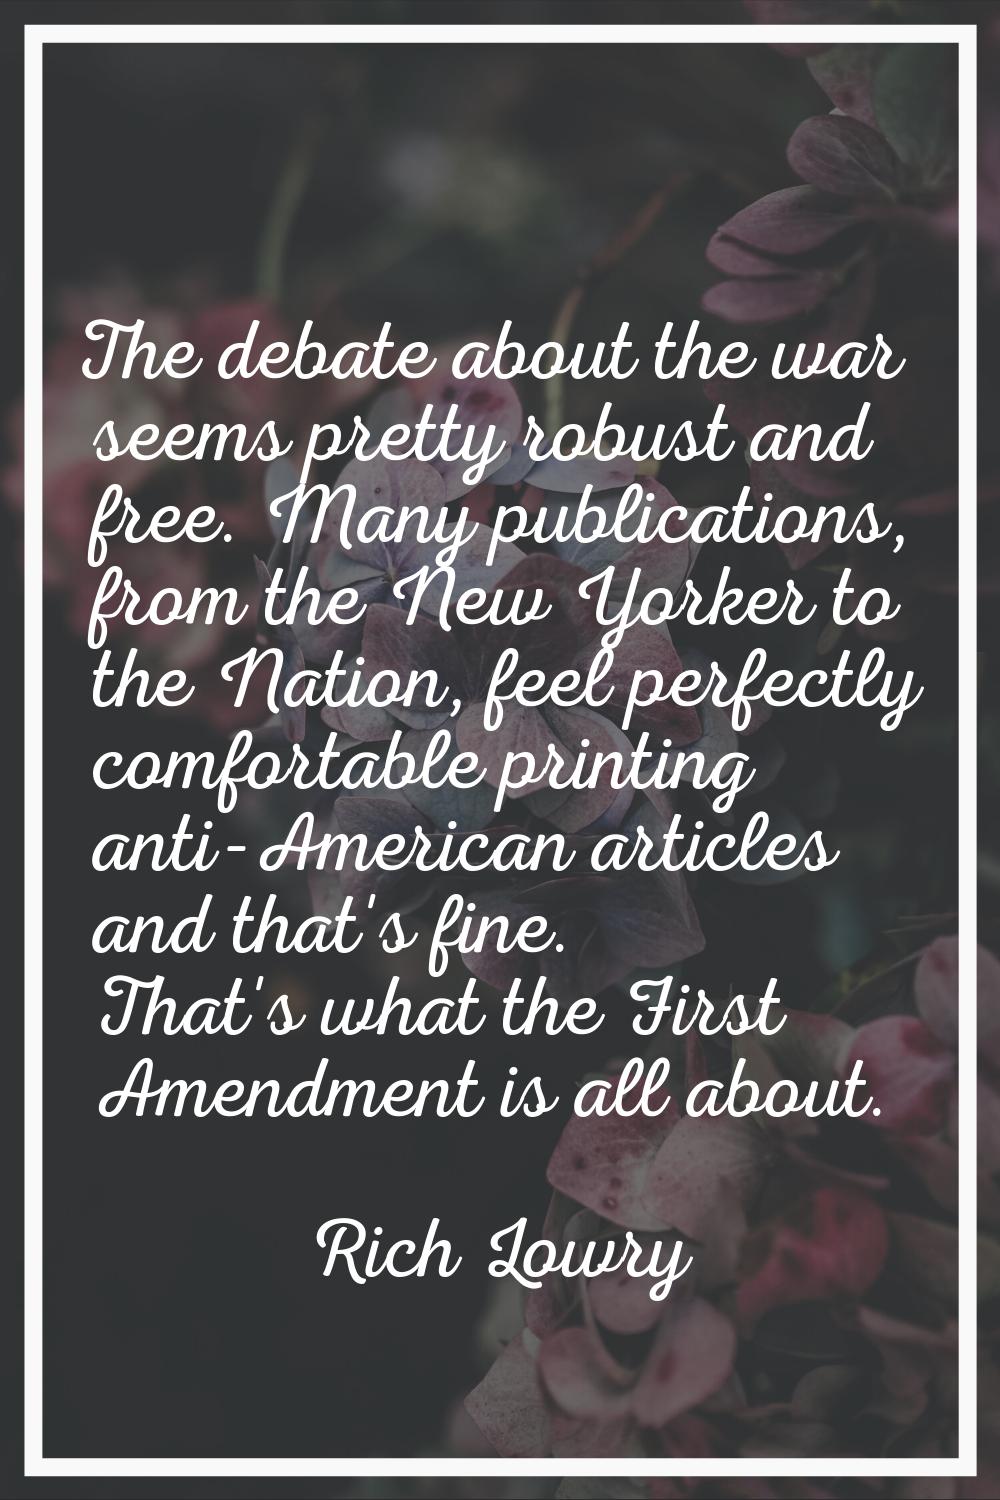 The debate about the war seems pretty robust and free. Many publications, from the New Yorker to th